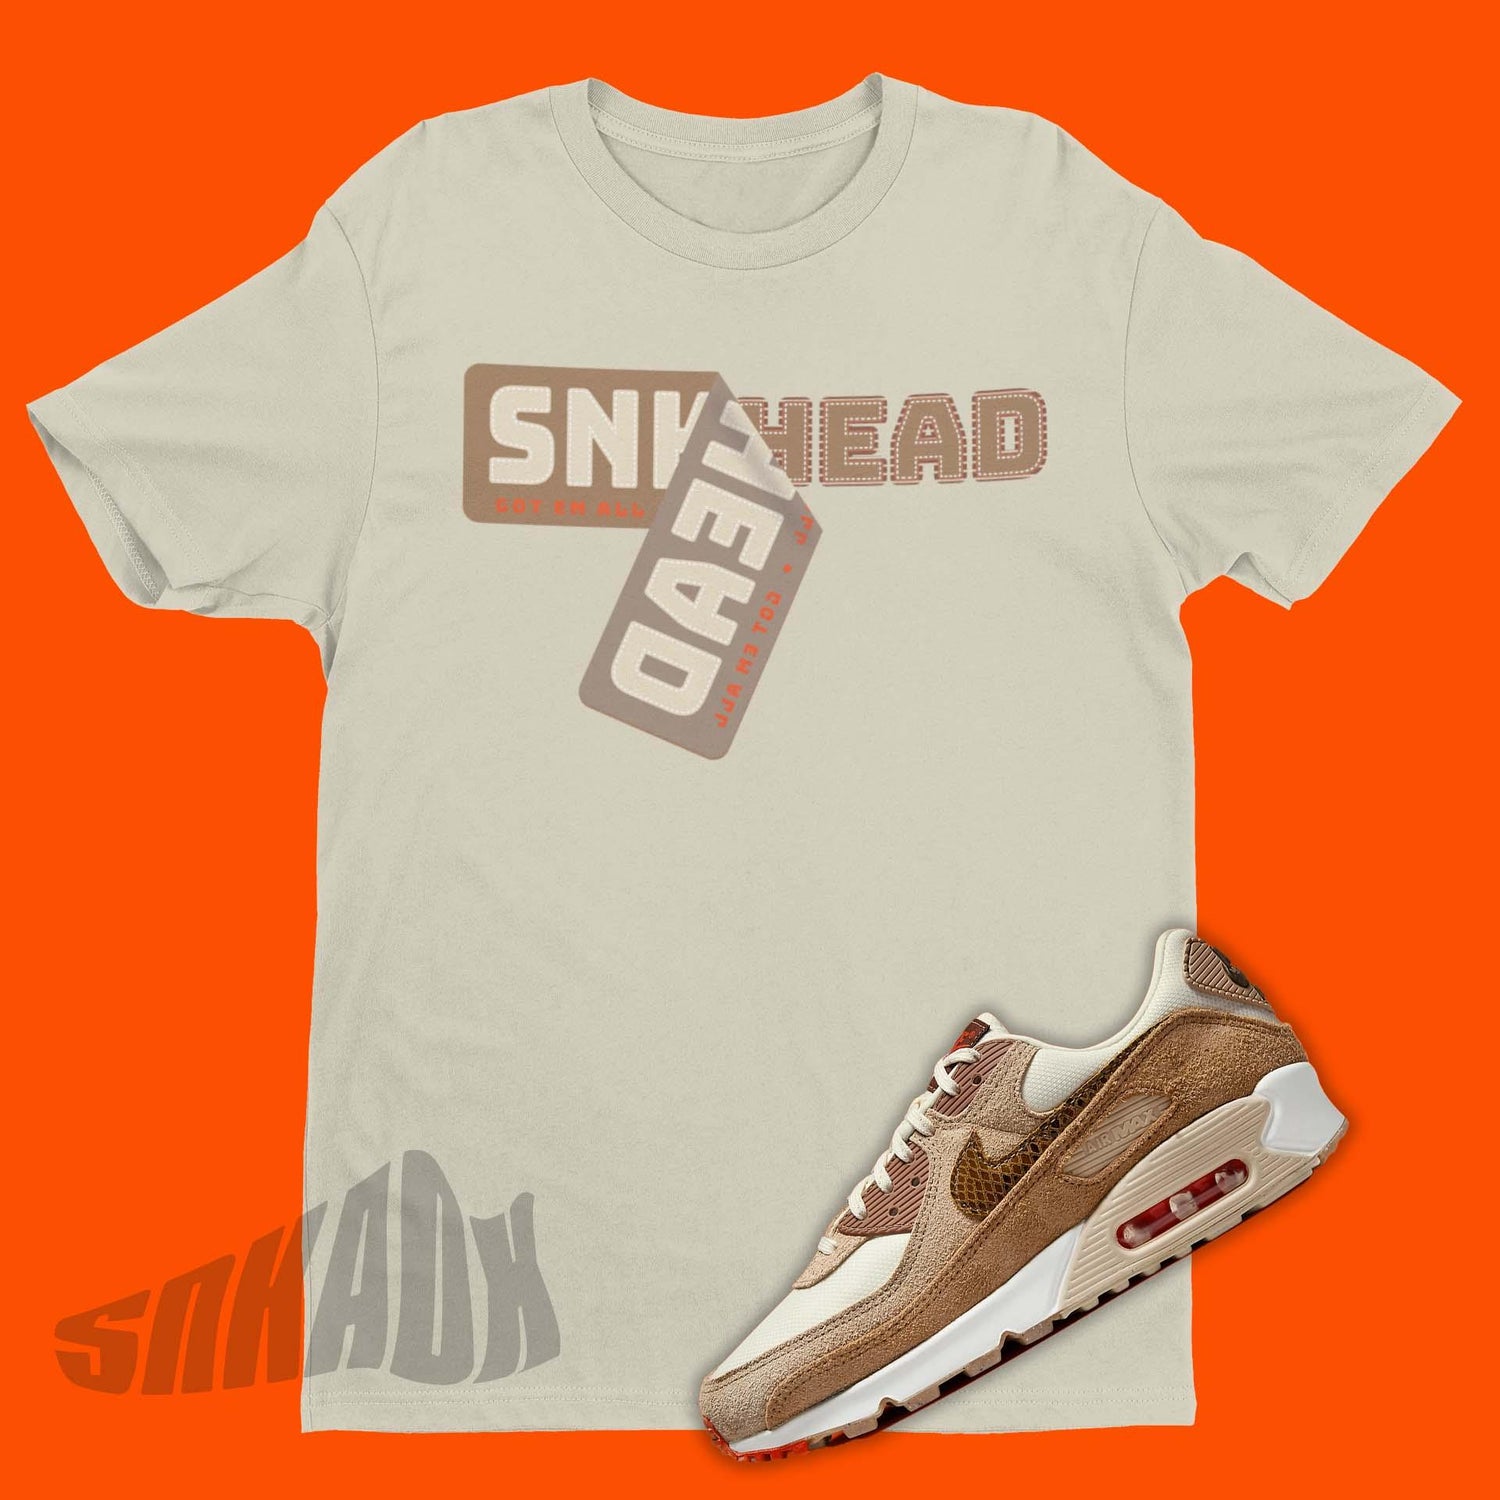 Sneaker Stickers Shirt To Match Nike Air Max 90 Snakeskin